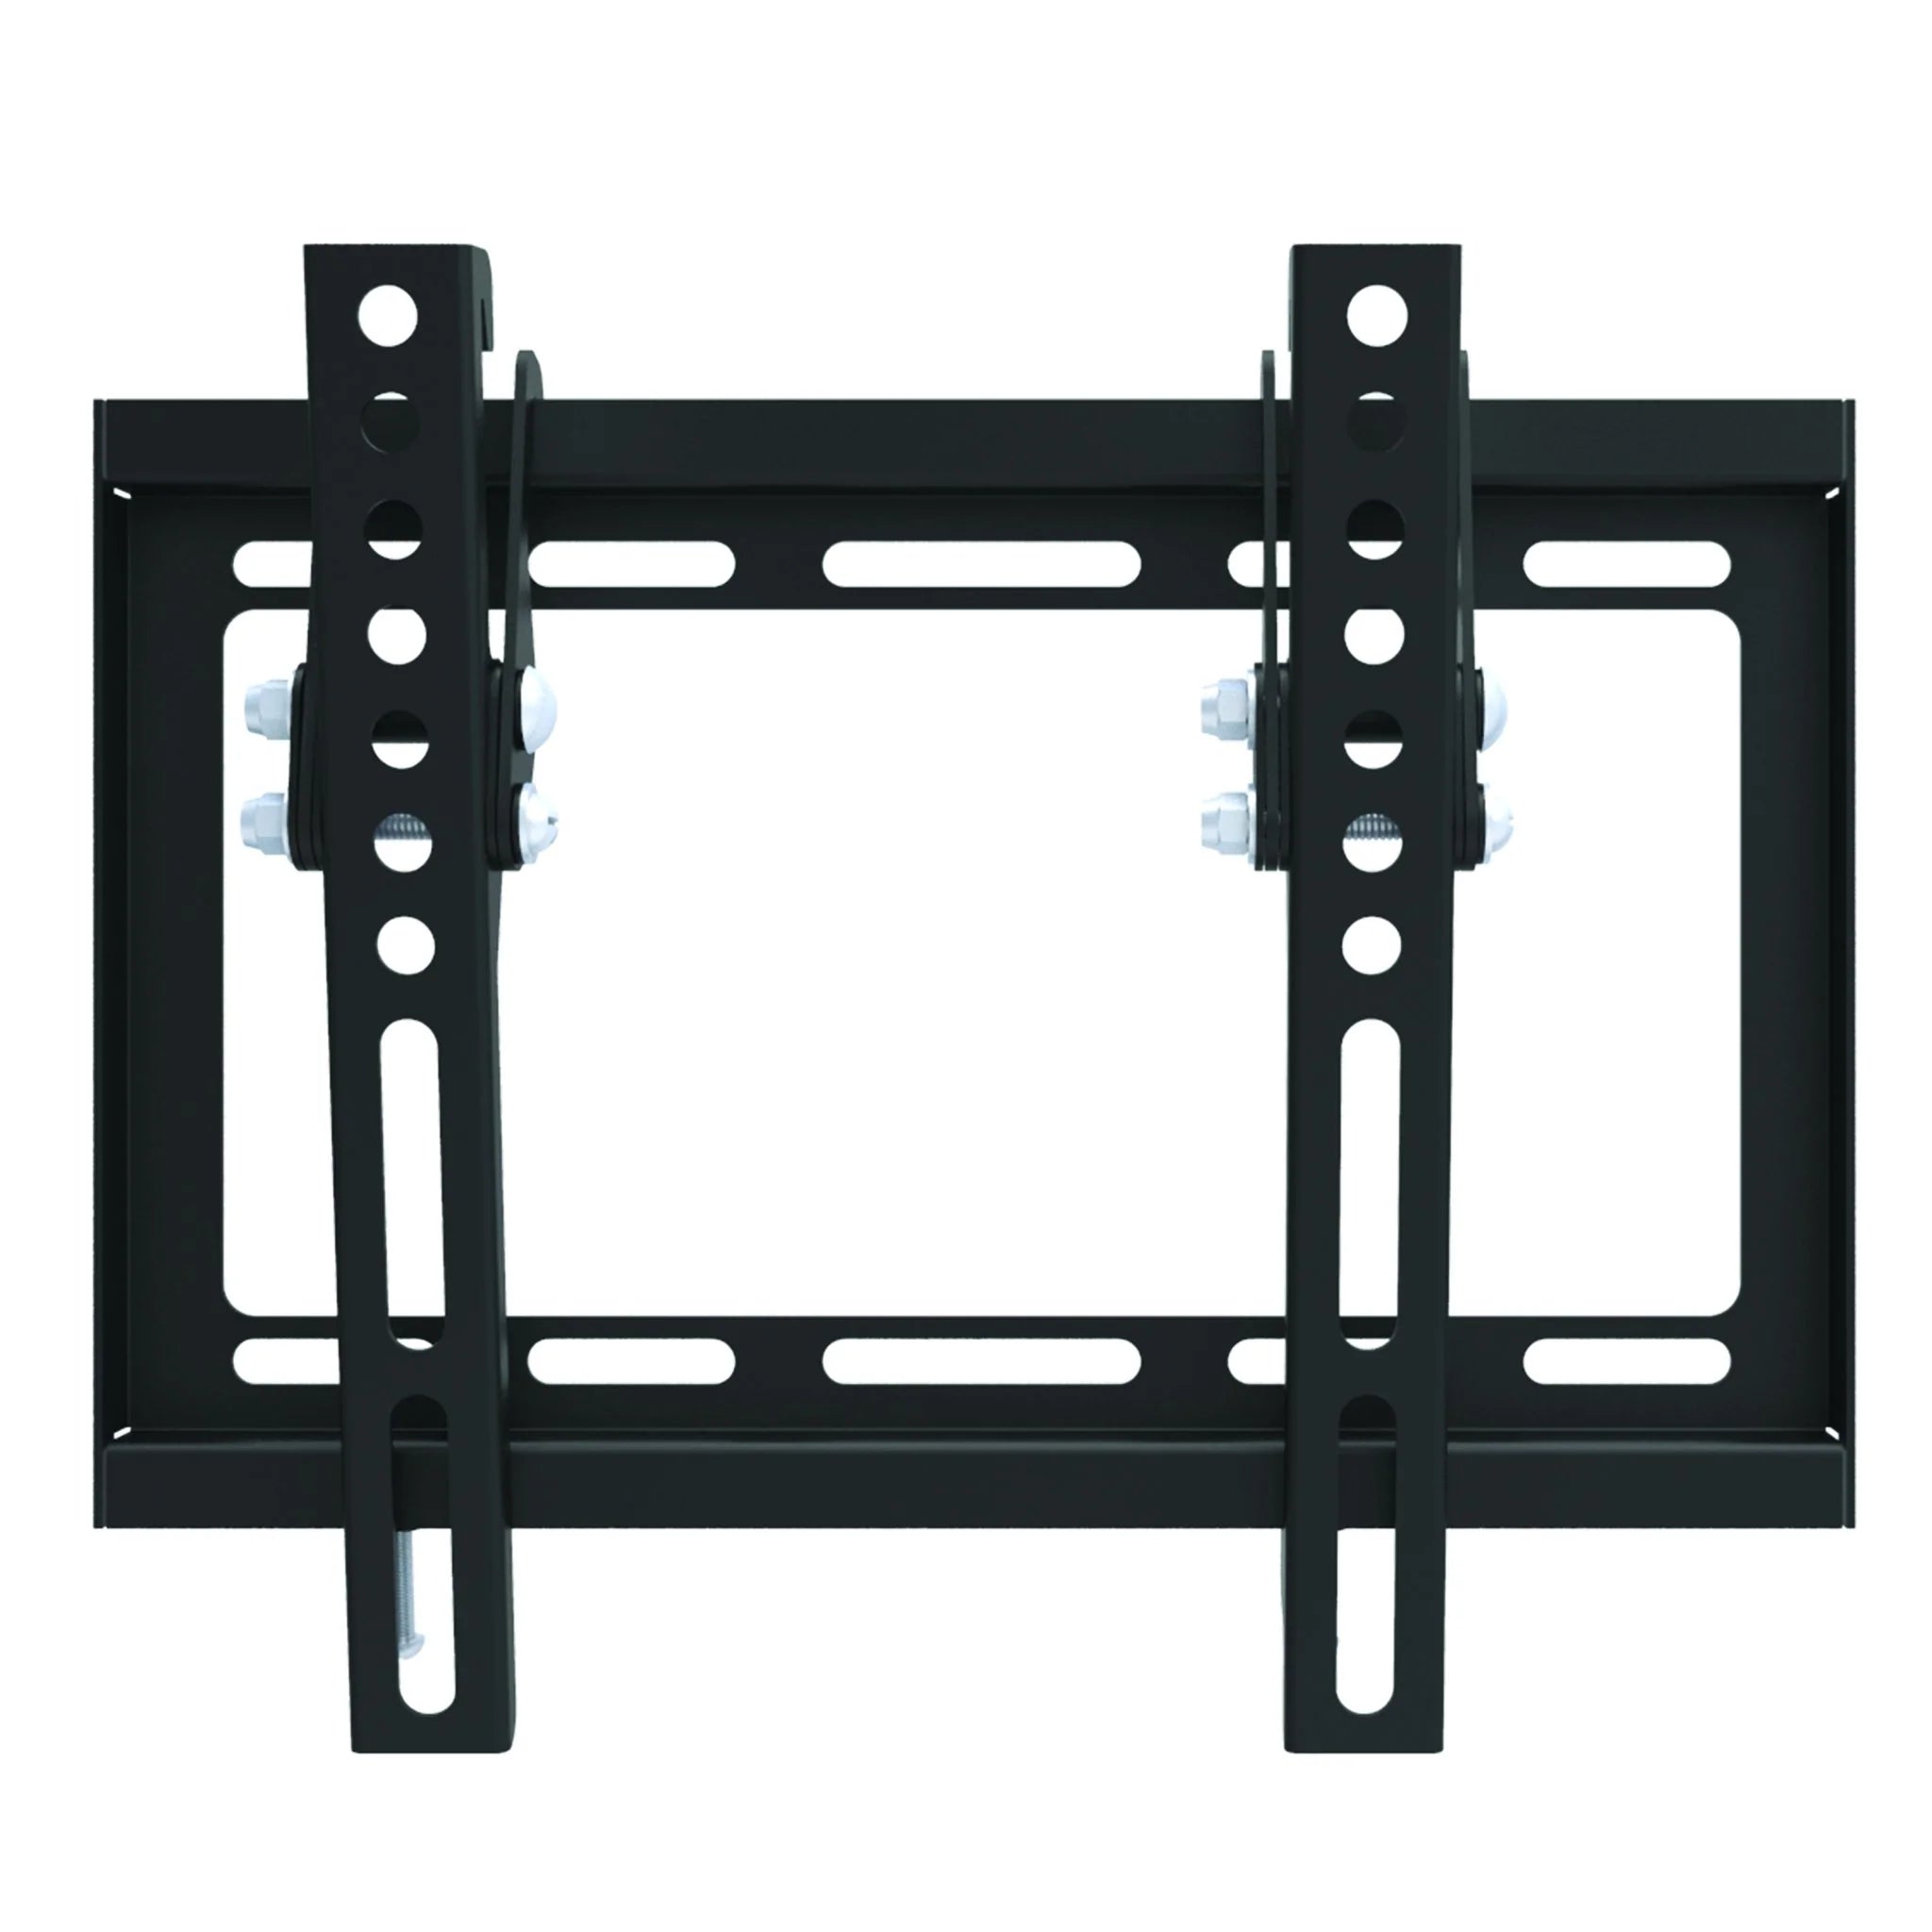 Monster, ONE Mounts brand FT22, TV wall mount with tilt, fits most 26"-47" TV's, 55lbs max